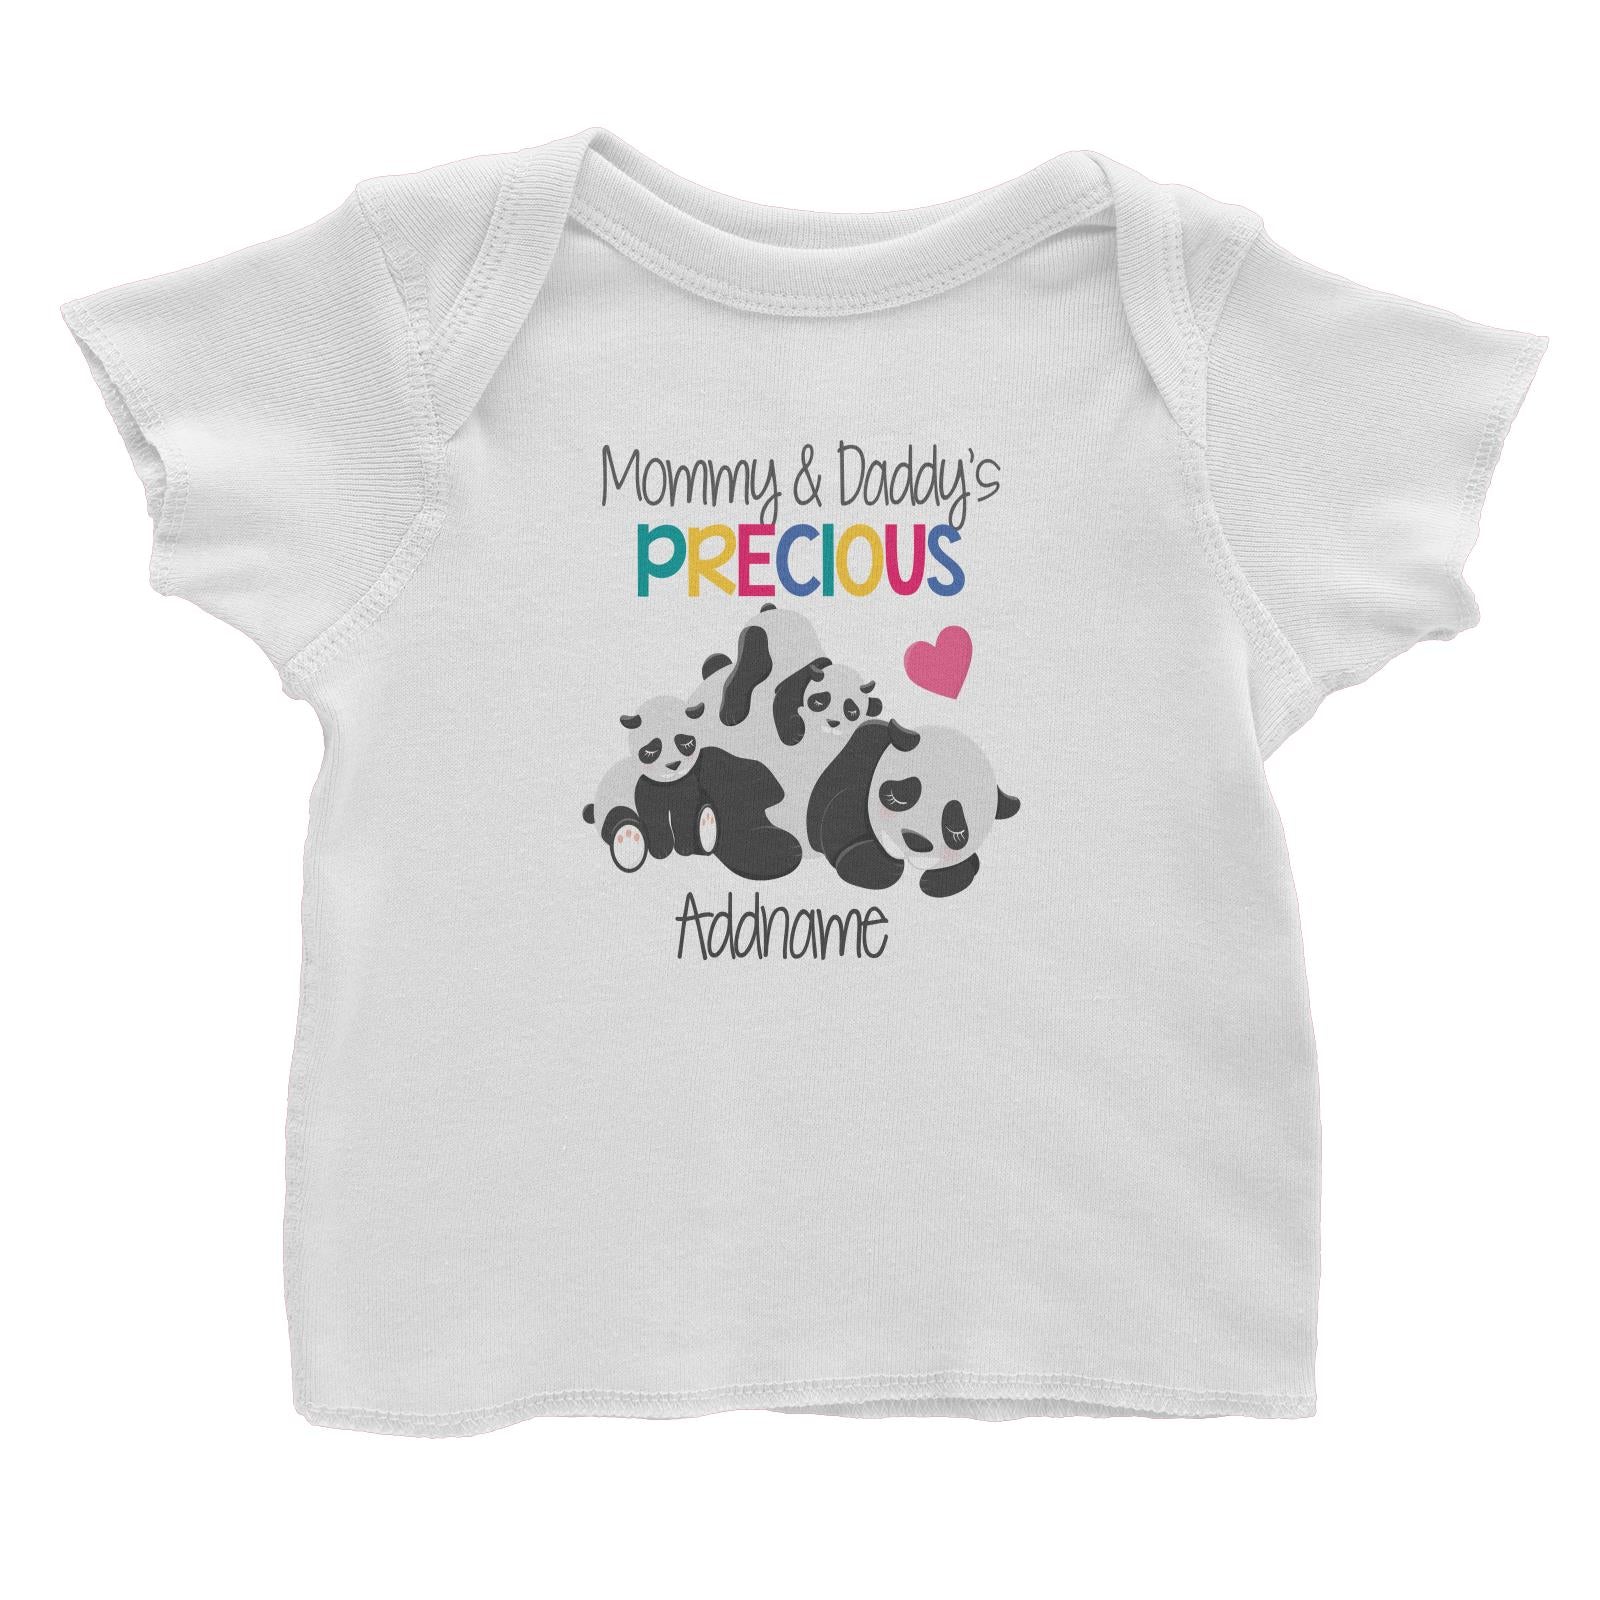 Animal & Loved Ones Mommy & Daddy's Precious Panda Family Addname Baby T-Shirt